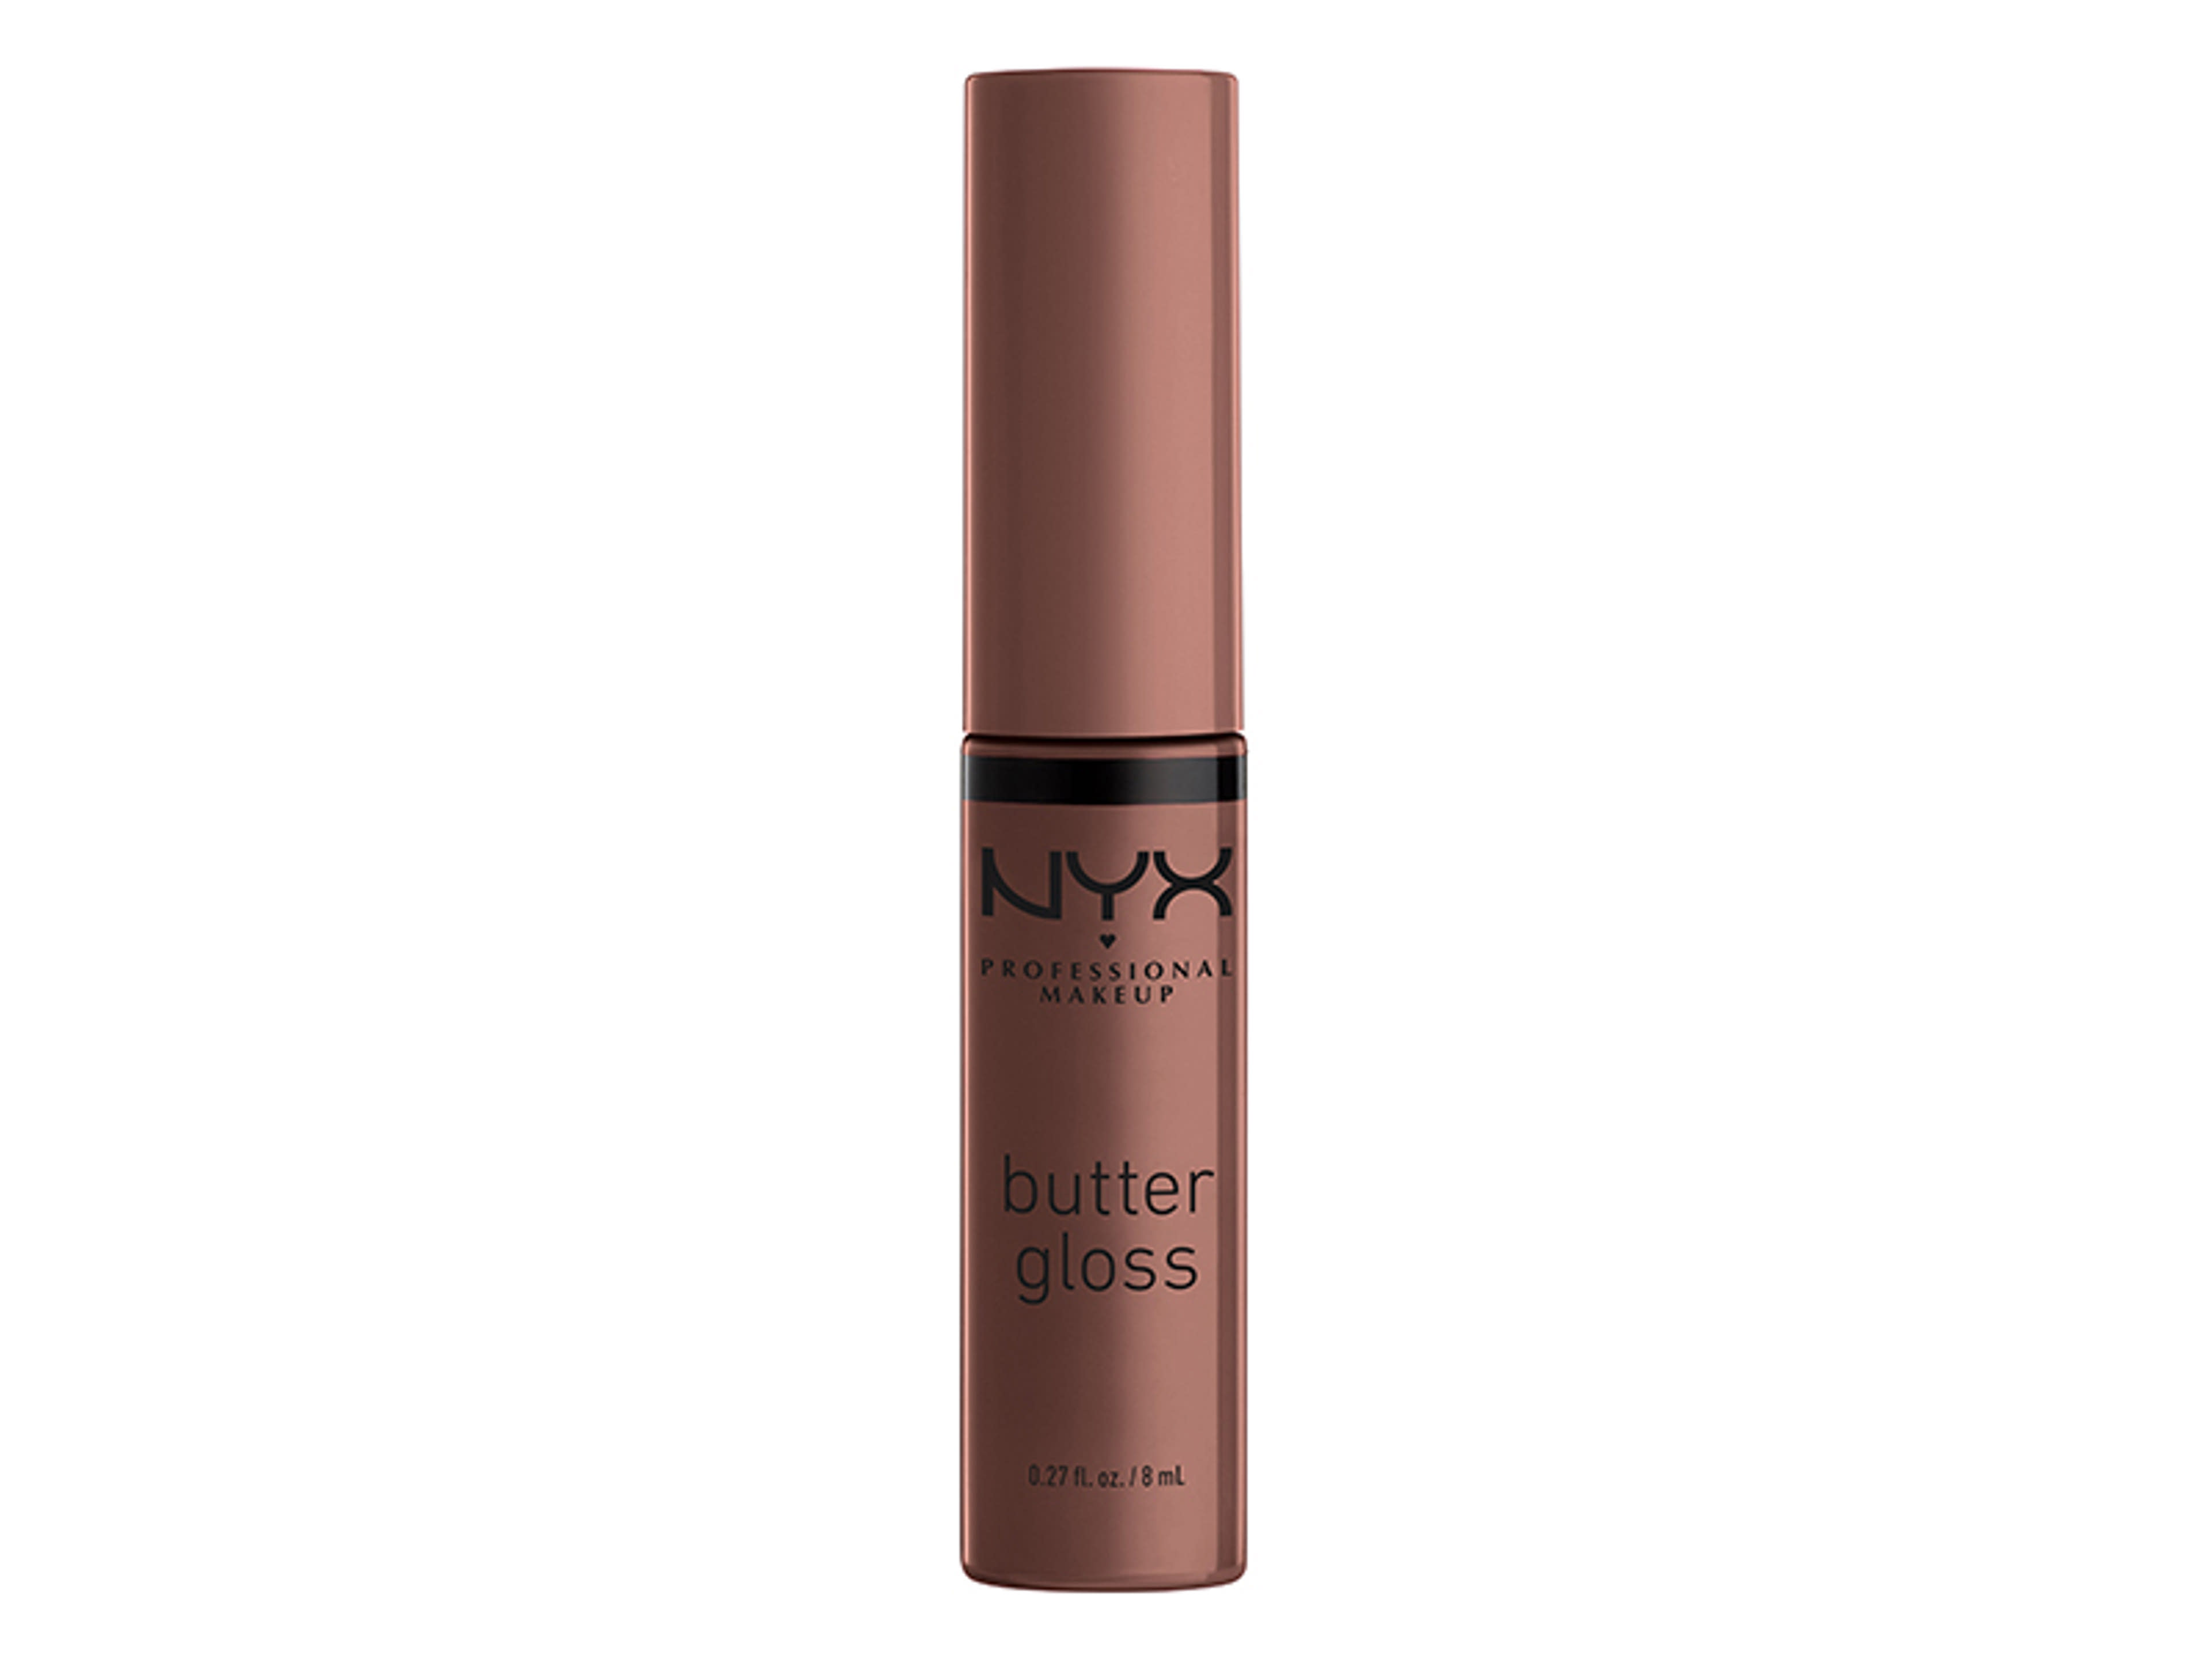 NYX Professional Makeup Butter Gloss ajakfény, Ginger Snap - 1 db